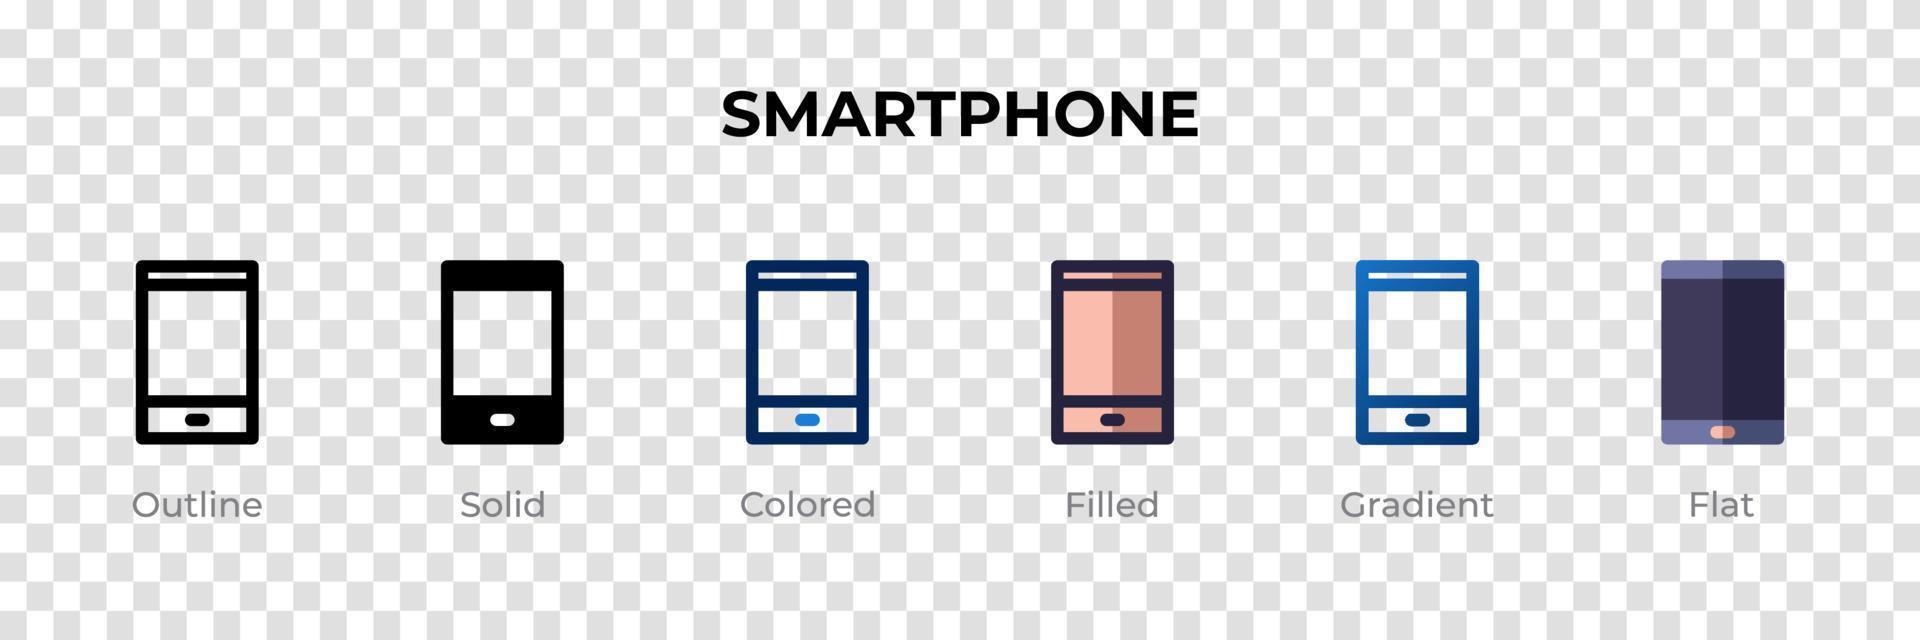 Smartphone icon in different style. Smartphone vector icons designed in outline, solid, colored, filled, gradient, and flat style. Symbol, logo illustration. Vector illustration